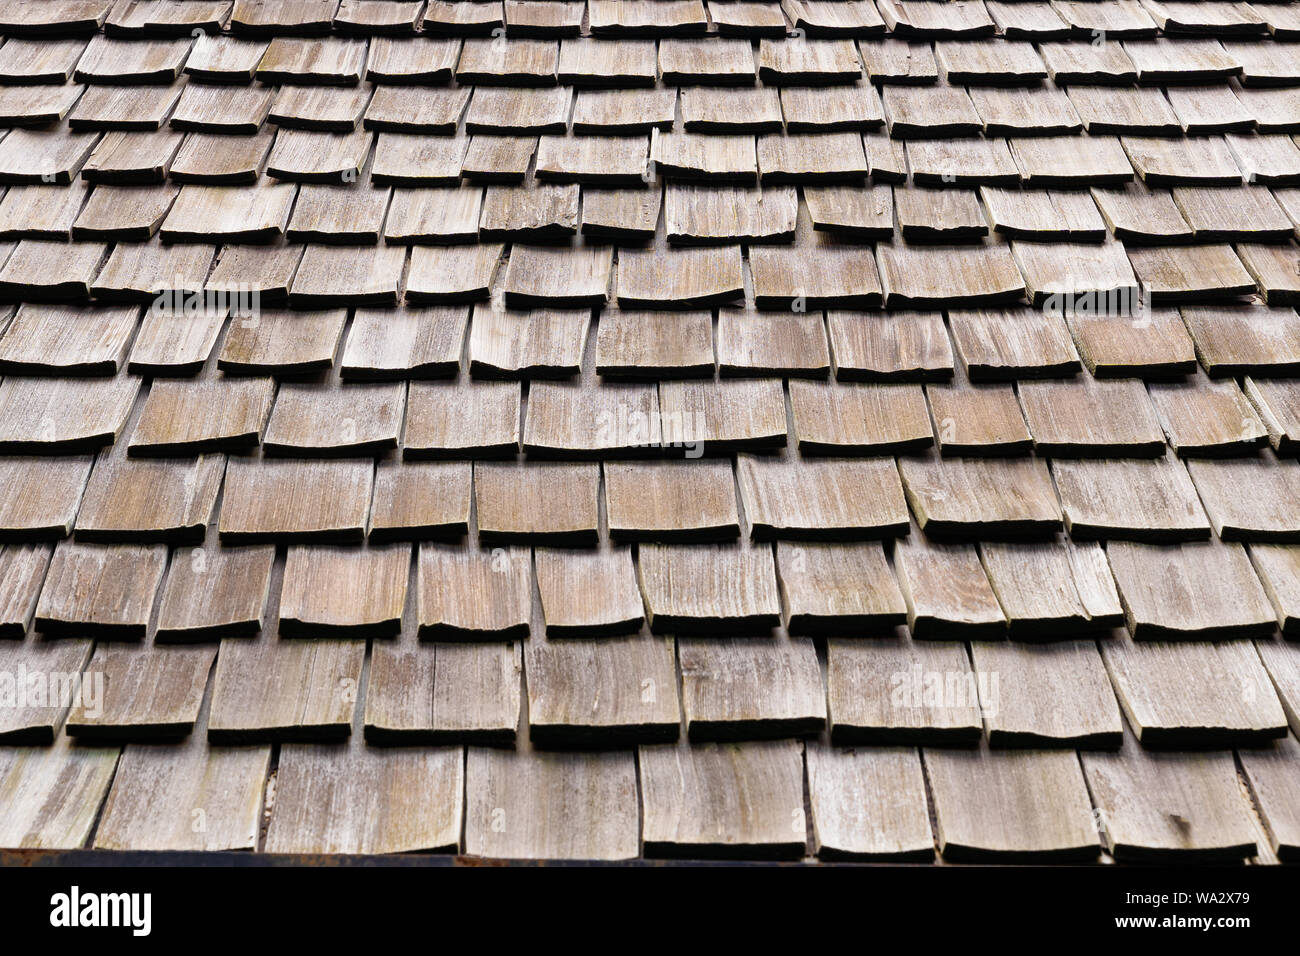 Background of Shingle aged wooden roof detail. Wood shake tile texture. Close up vintage wood roof pattern concept background. Stock Photo